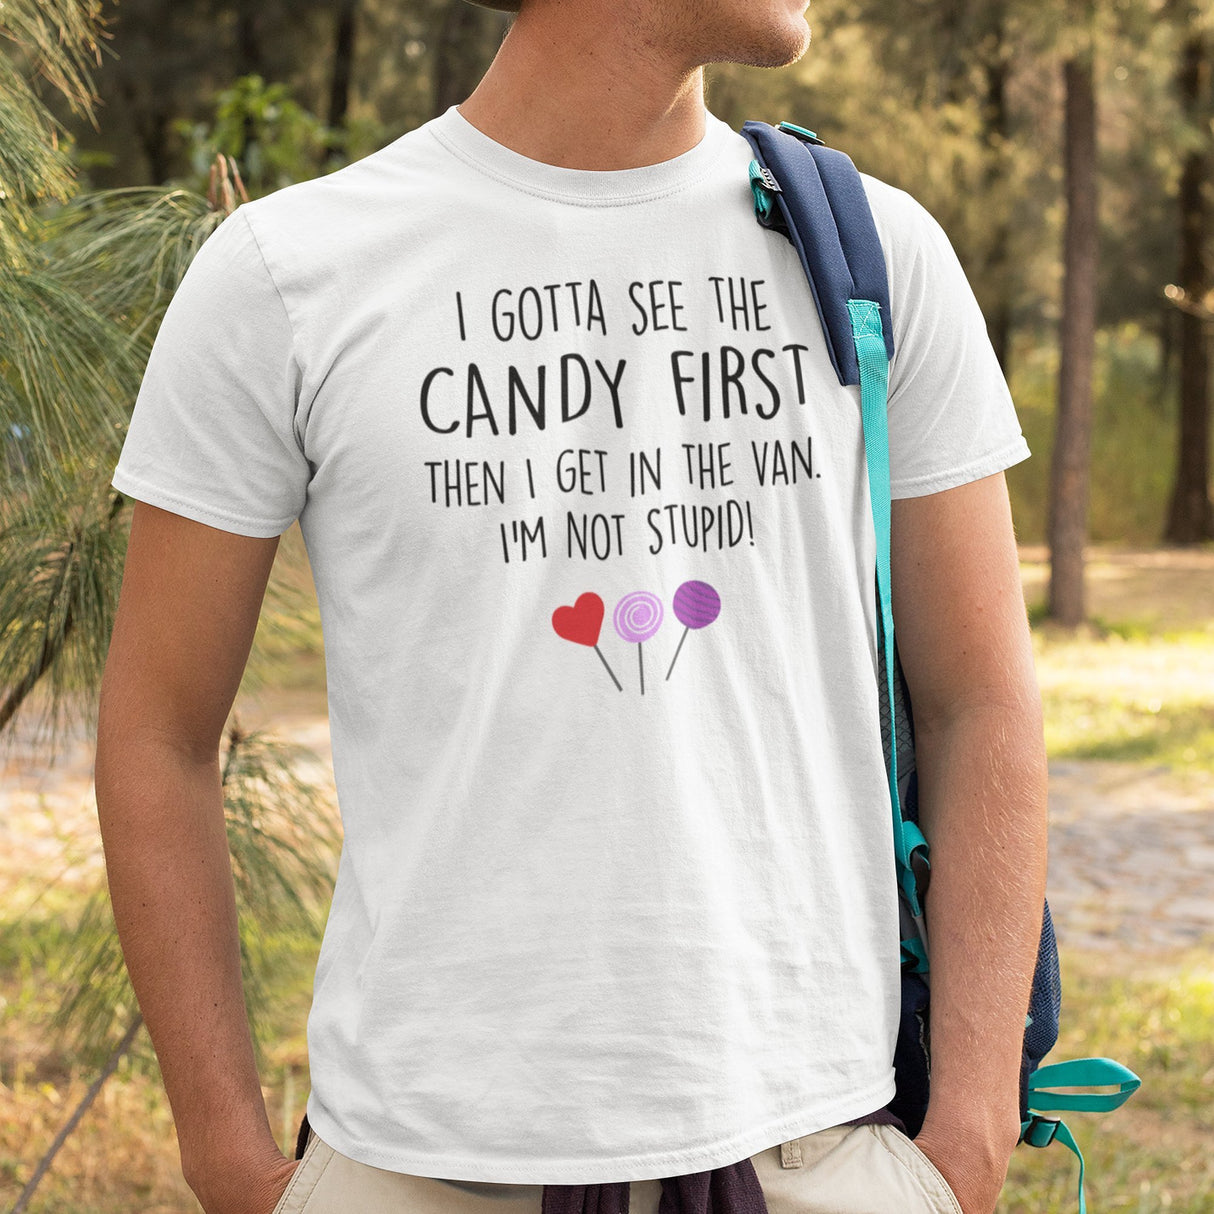 i-gotta-see-the-candy-first-then-i-get-in-the-van-im-not-stupid-funny-tee-candy-t-shirt-van-tee-t-shirt-tee#color_white